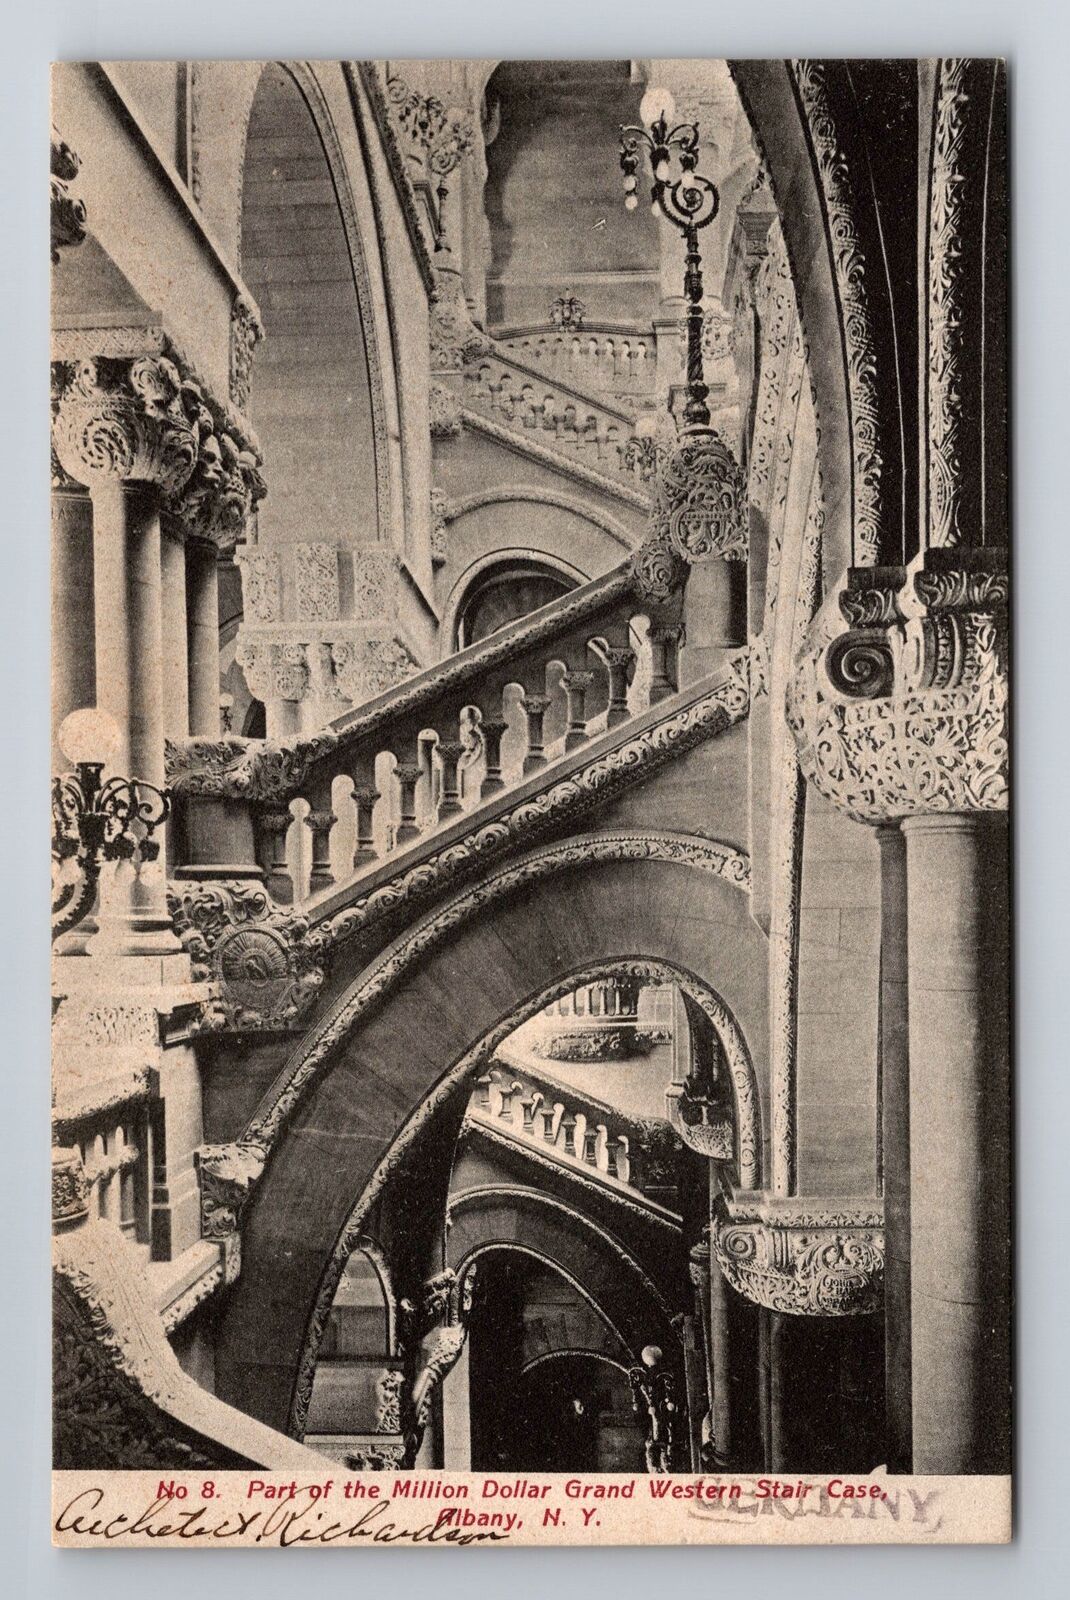 Albany NY-New York, Grand Western Stair Case, Antique, Vintage Souvenir Postcard